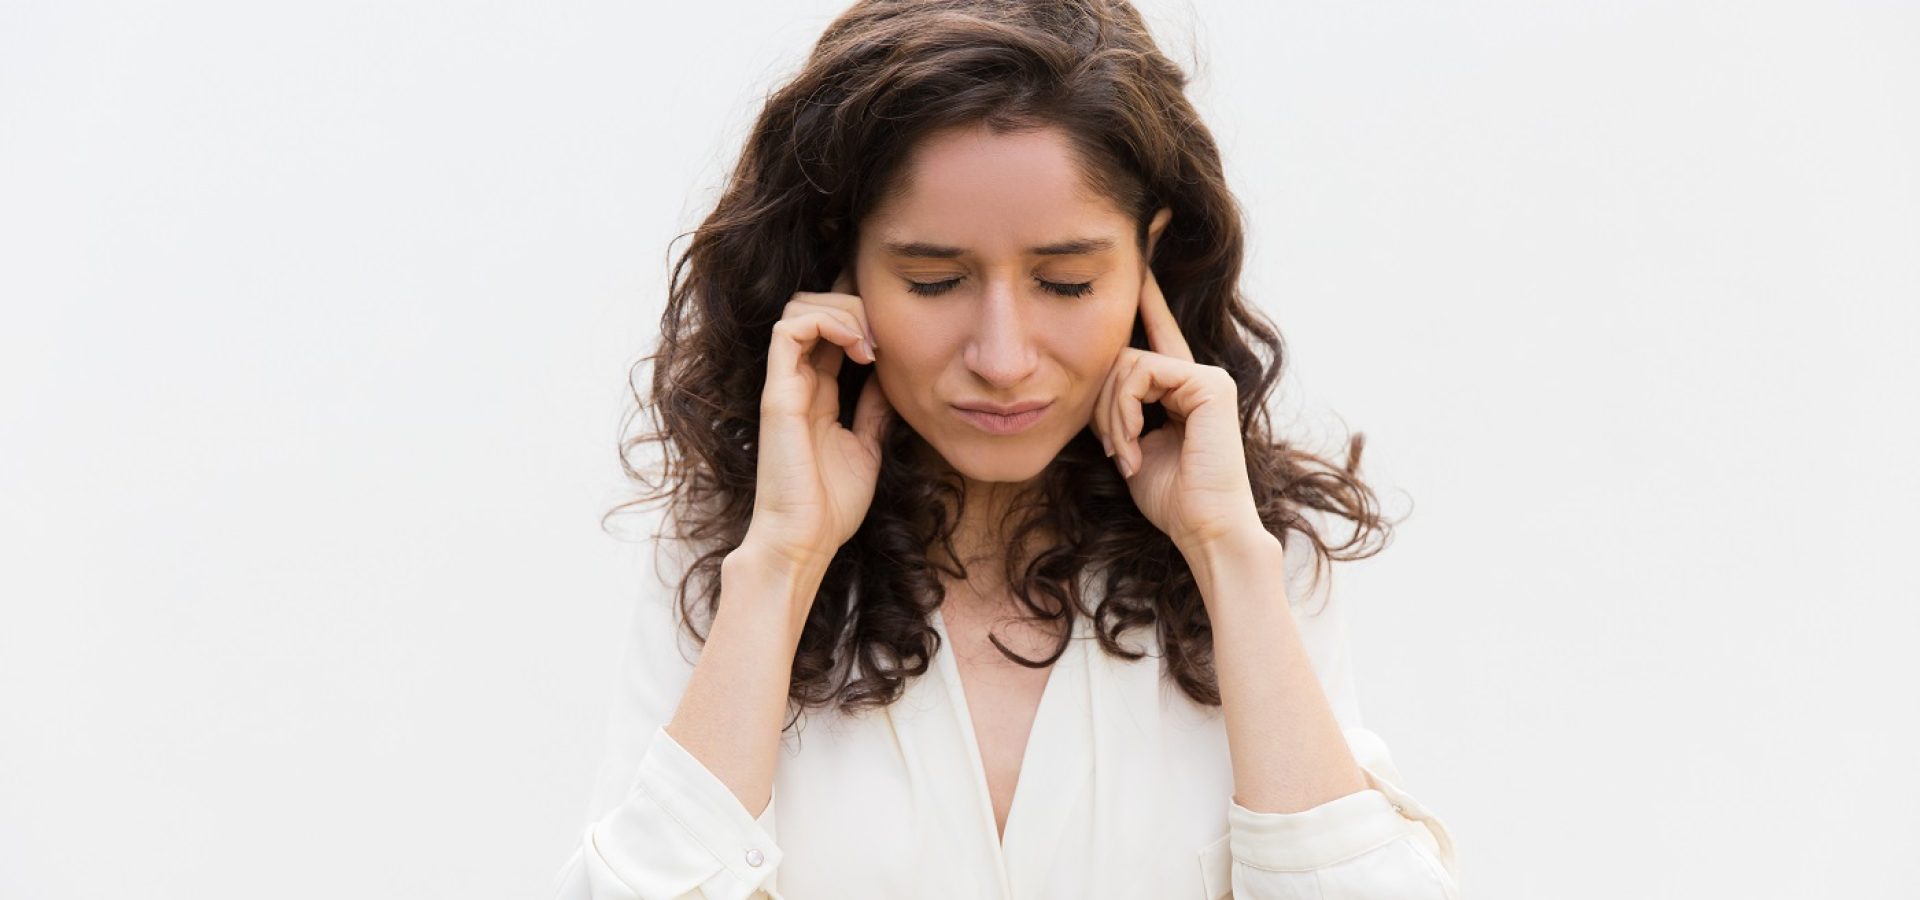 Woman plugging her ears, symbolizing they are clogged